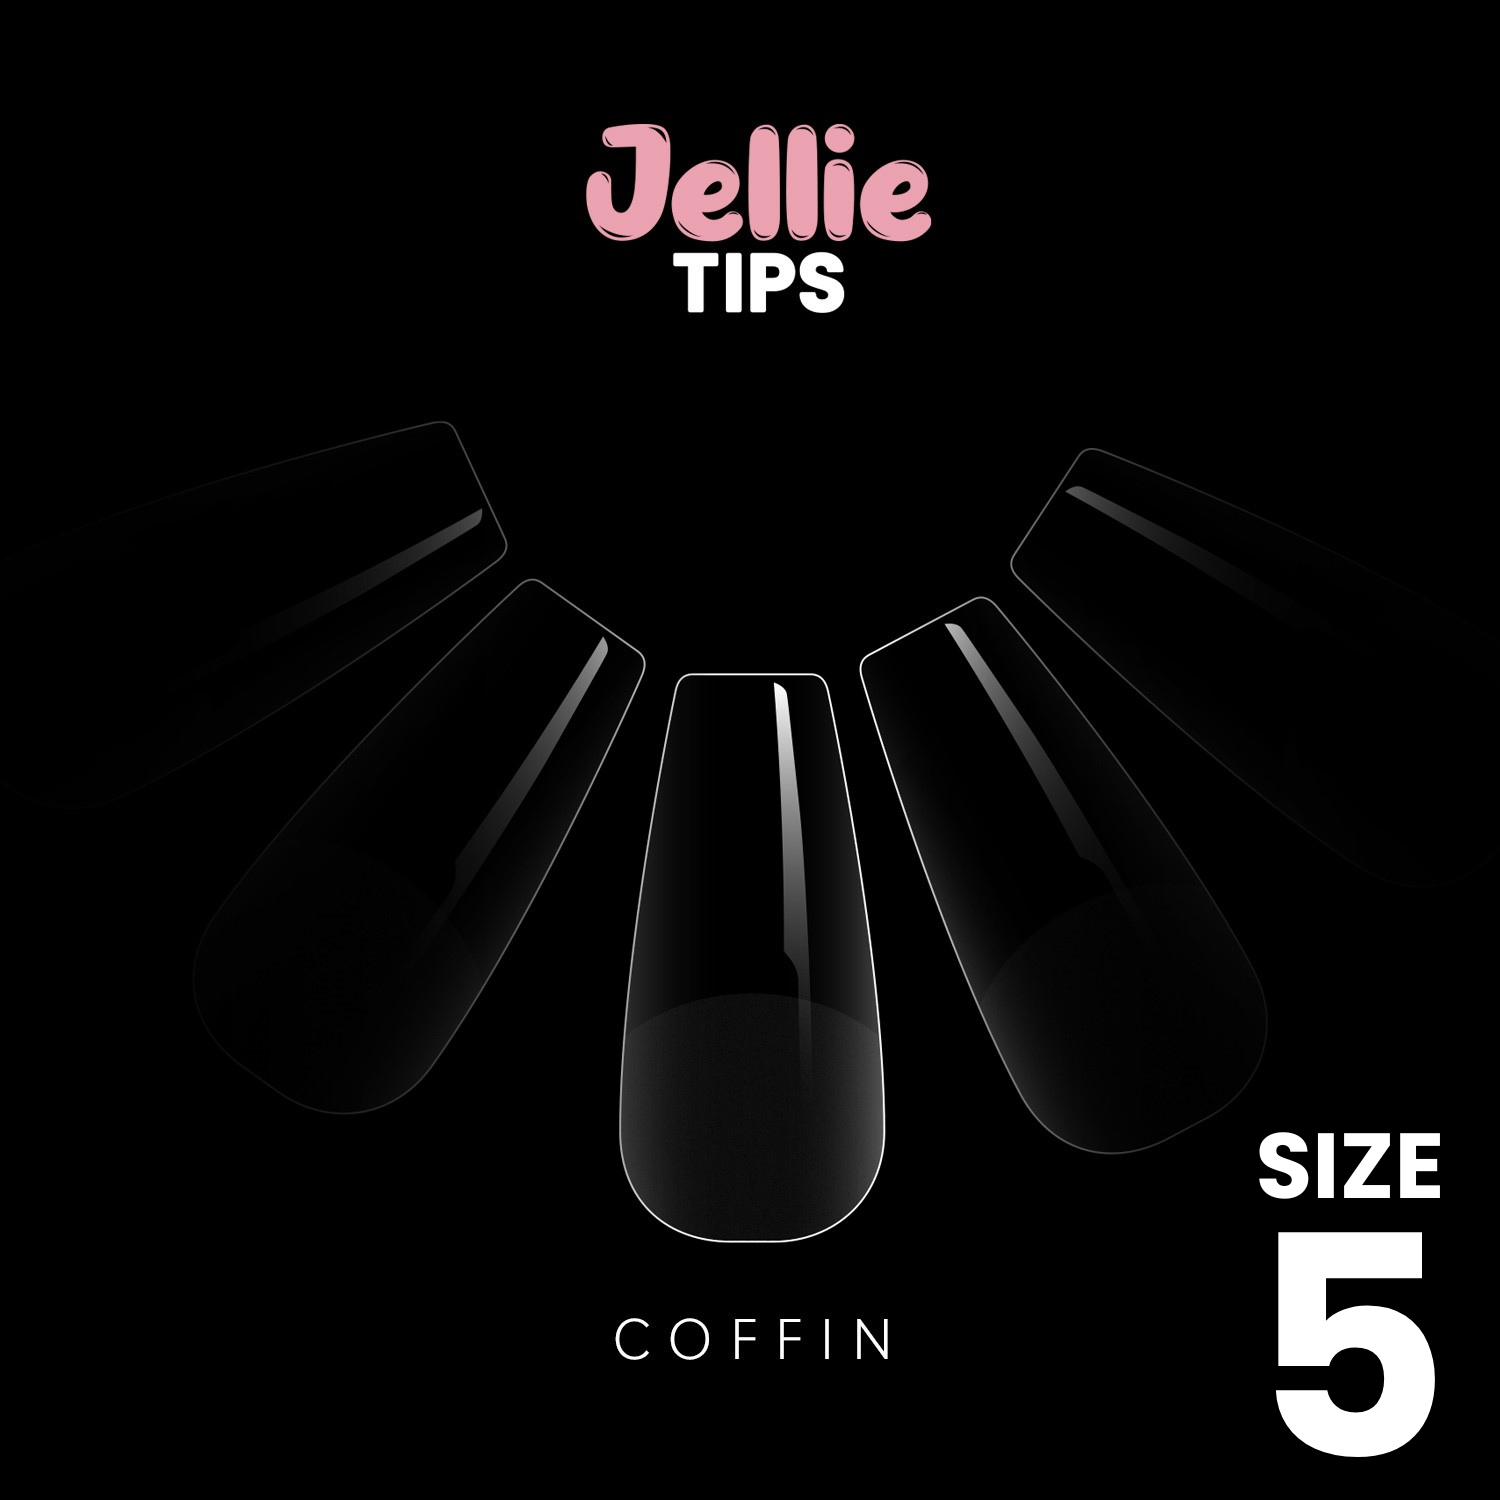 Halo Jellie Nail Tips Coffin, Sizes 5, 50 One Size